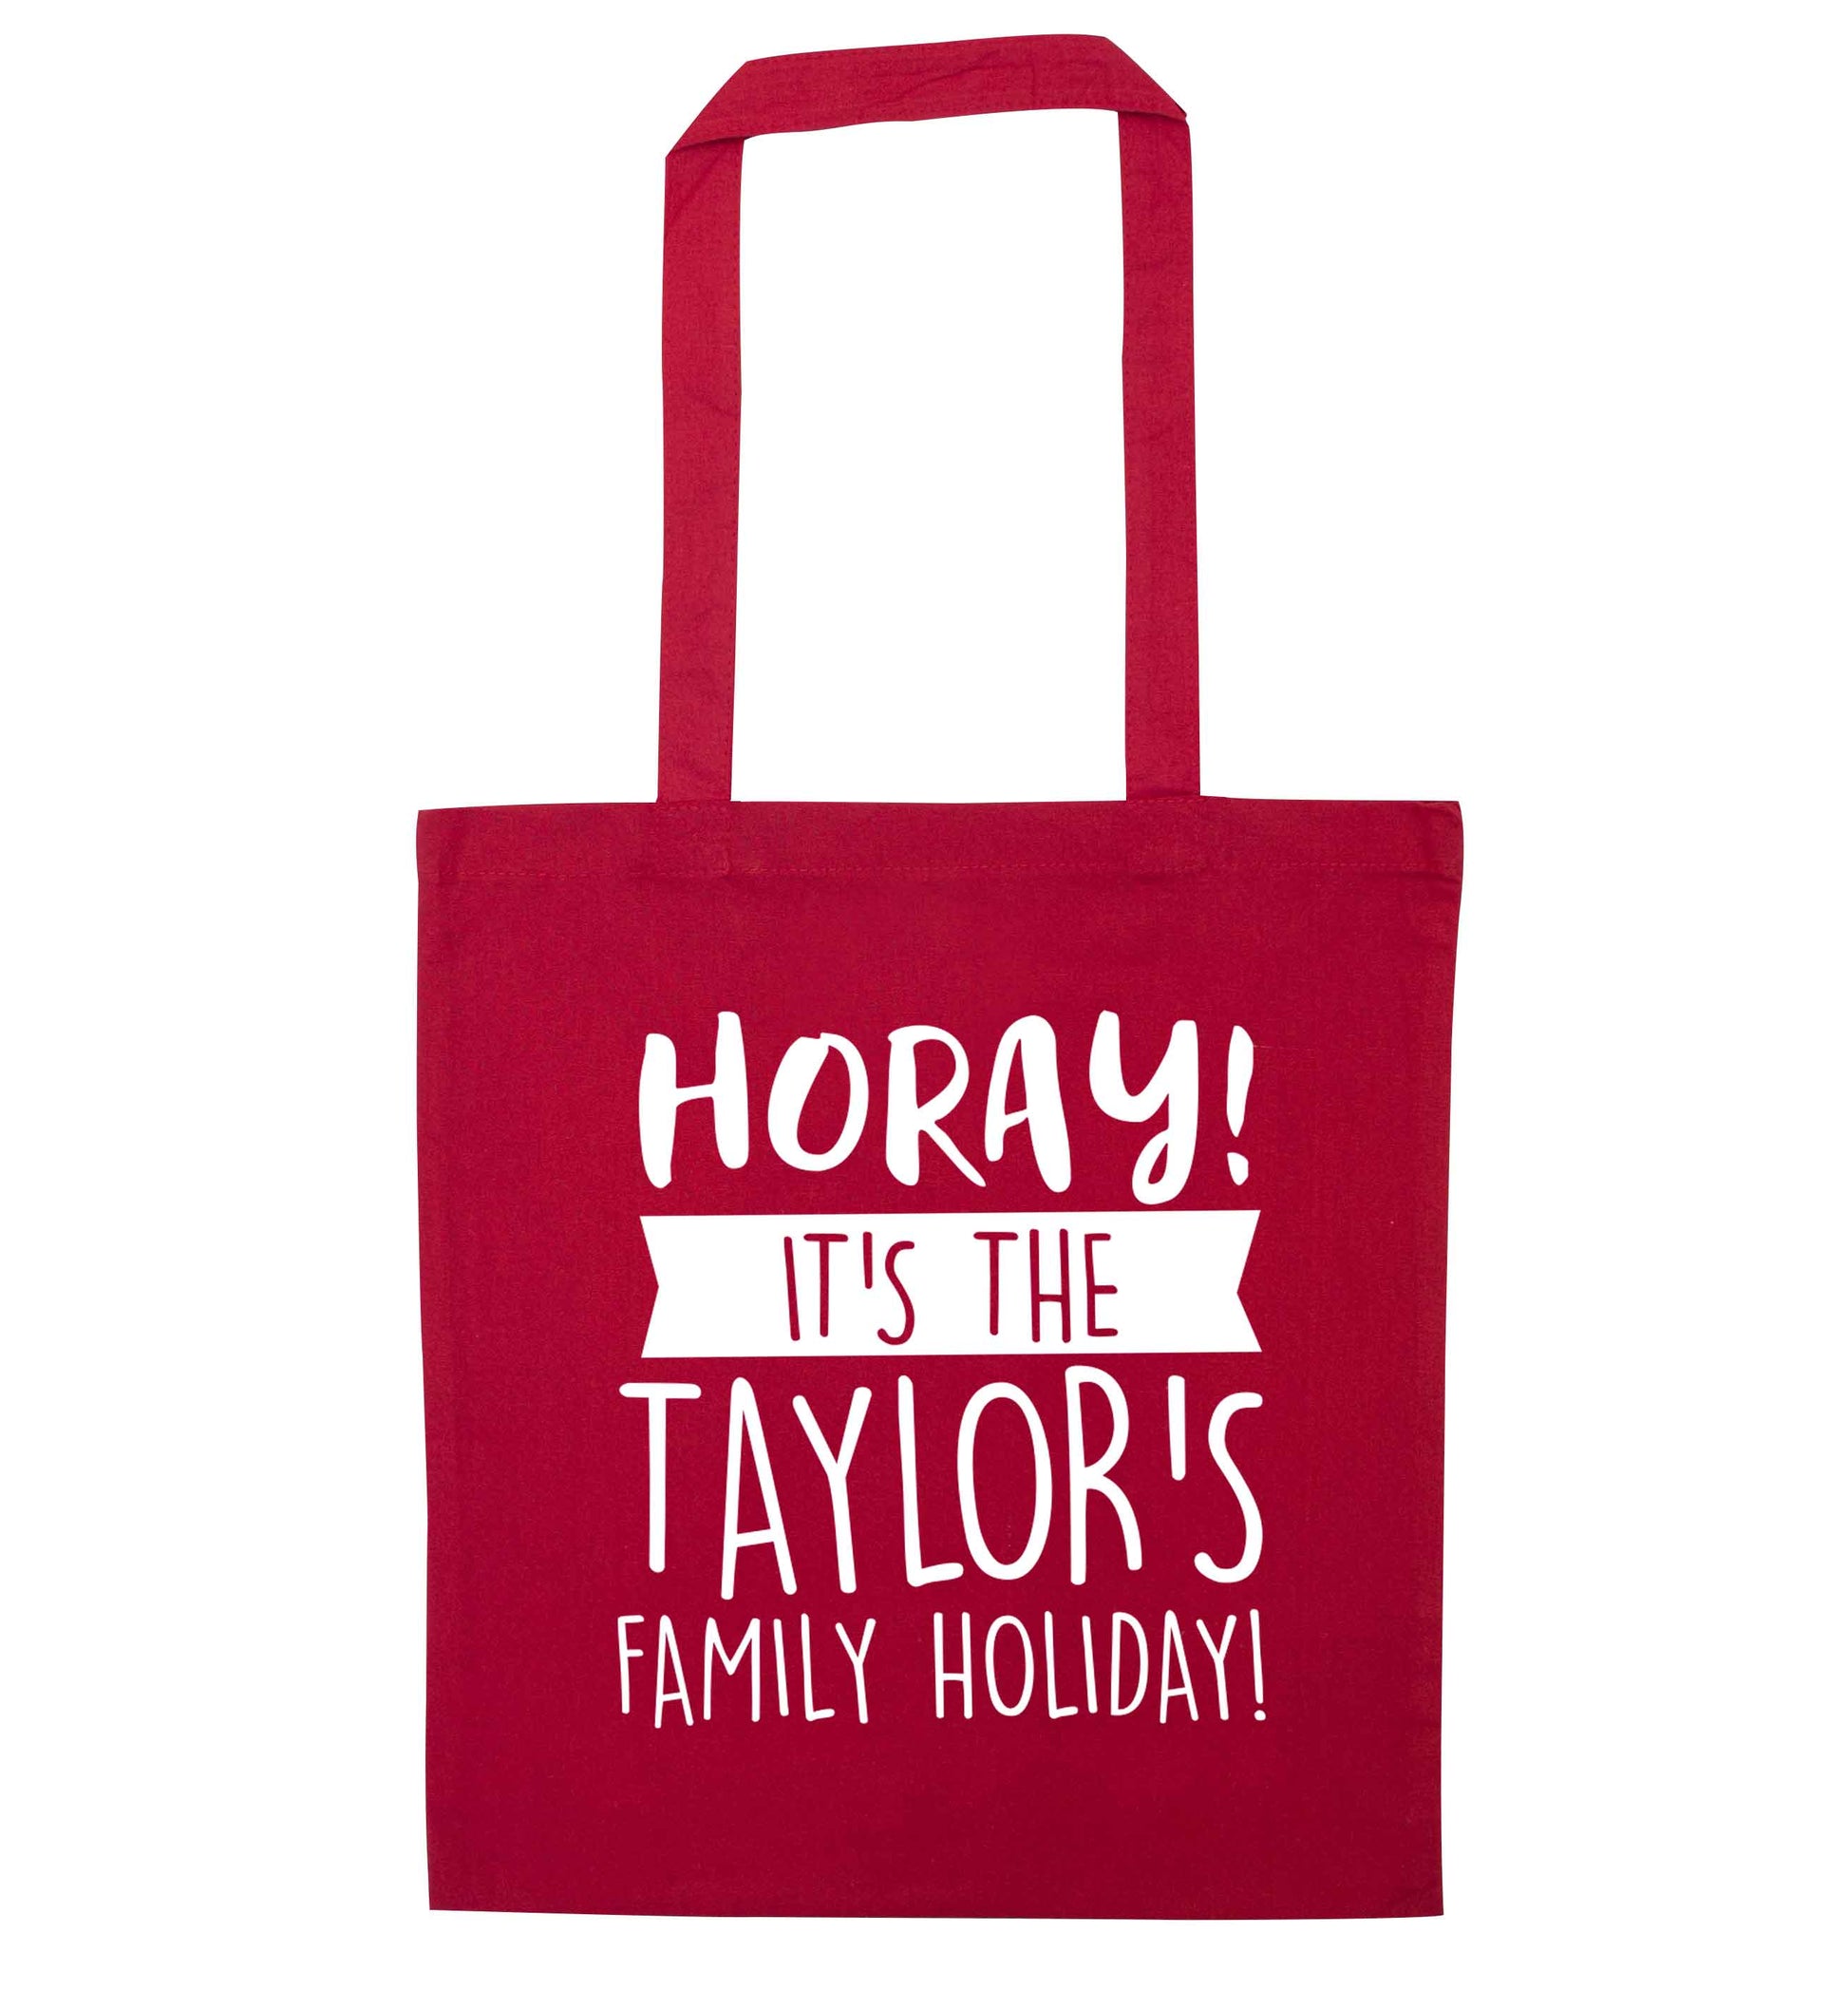 Horay it's the Taylor's family holiday! personalised item red tote bag